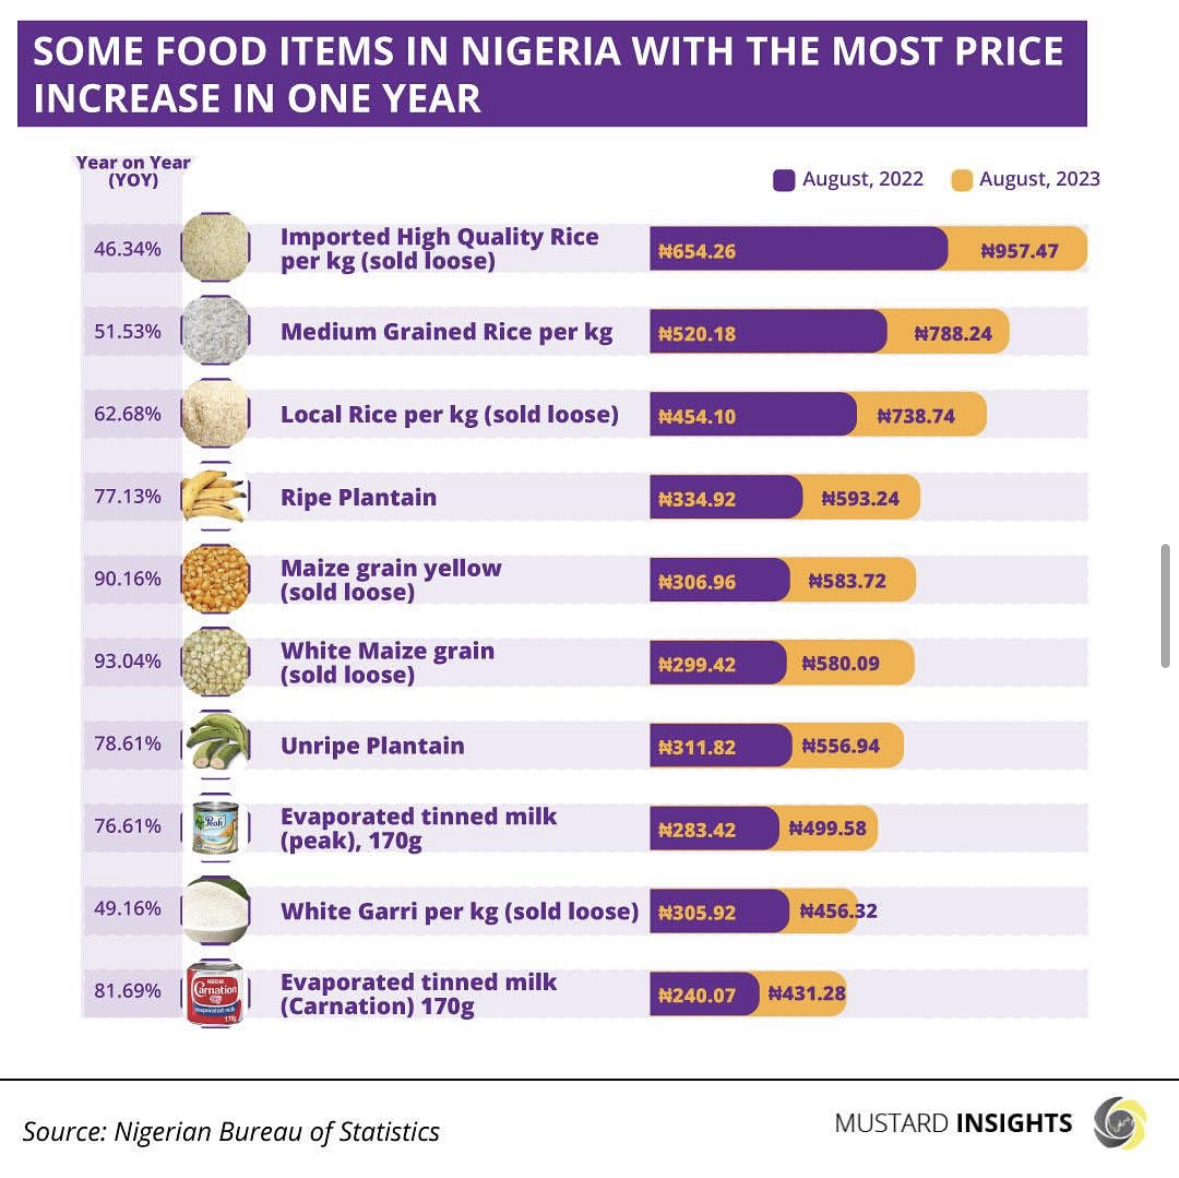 Some Food Items With The Most Price Increase In One Year